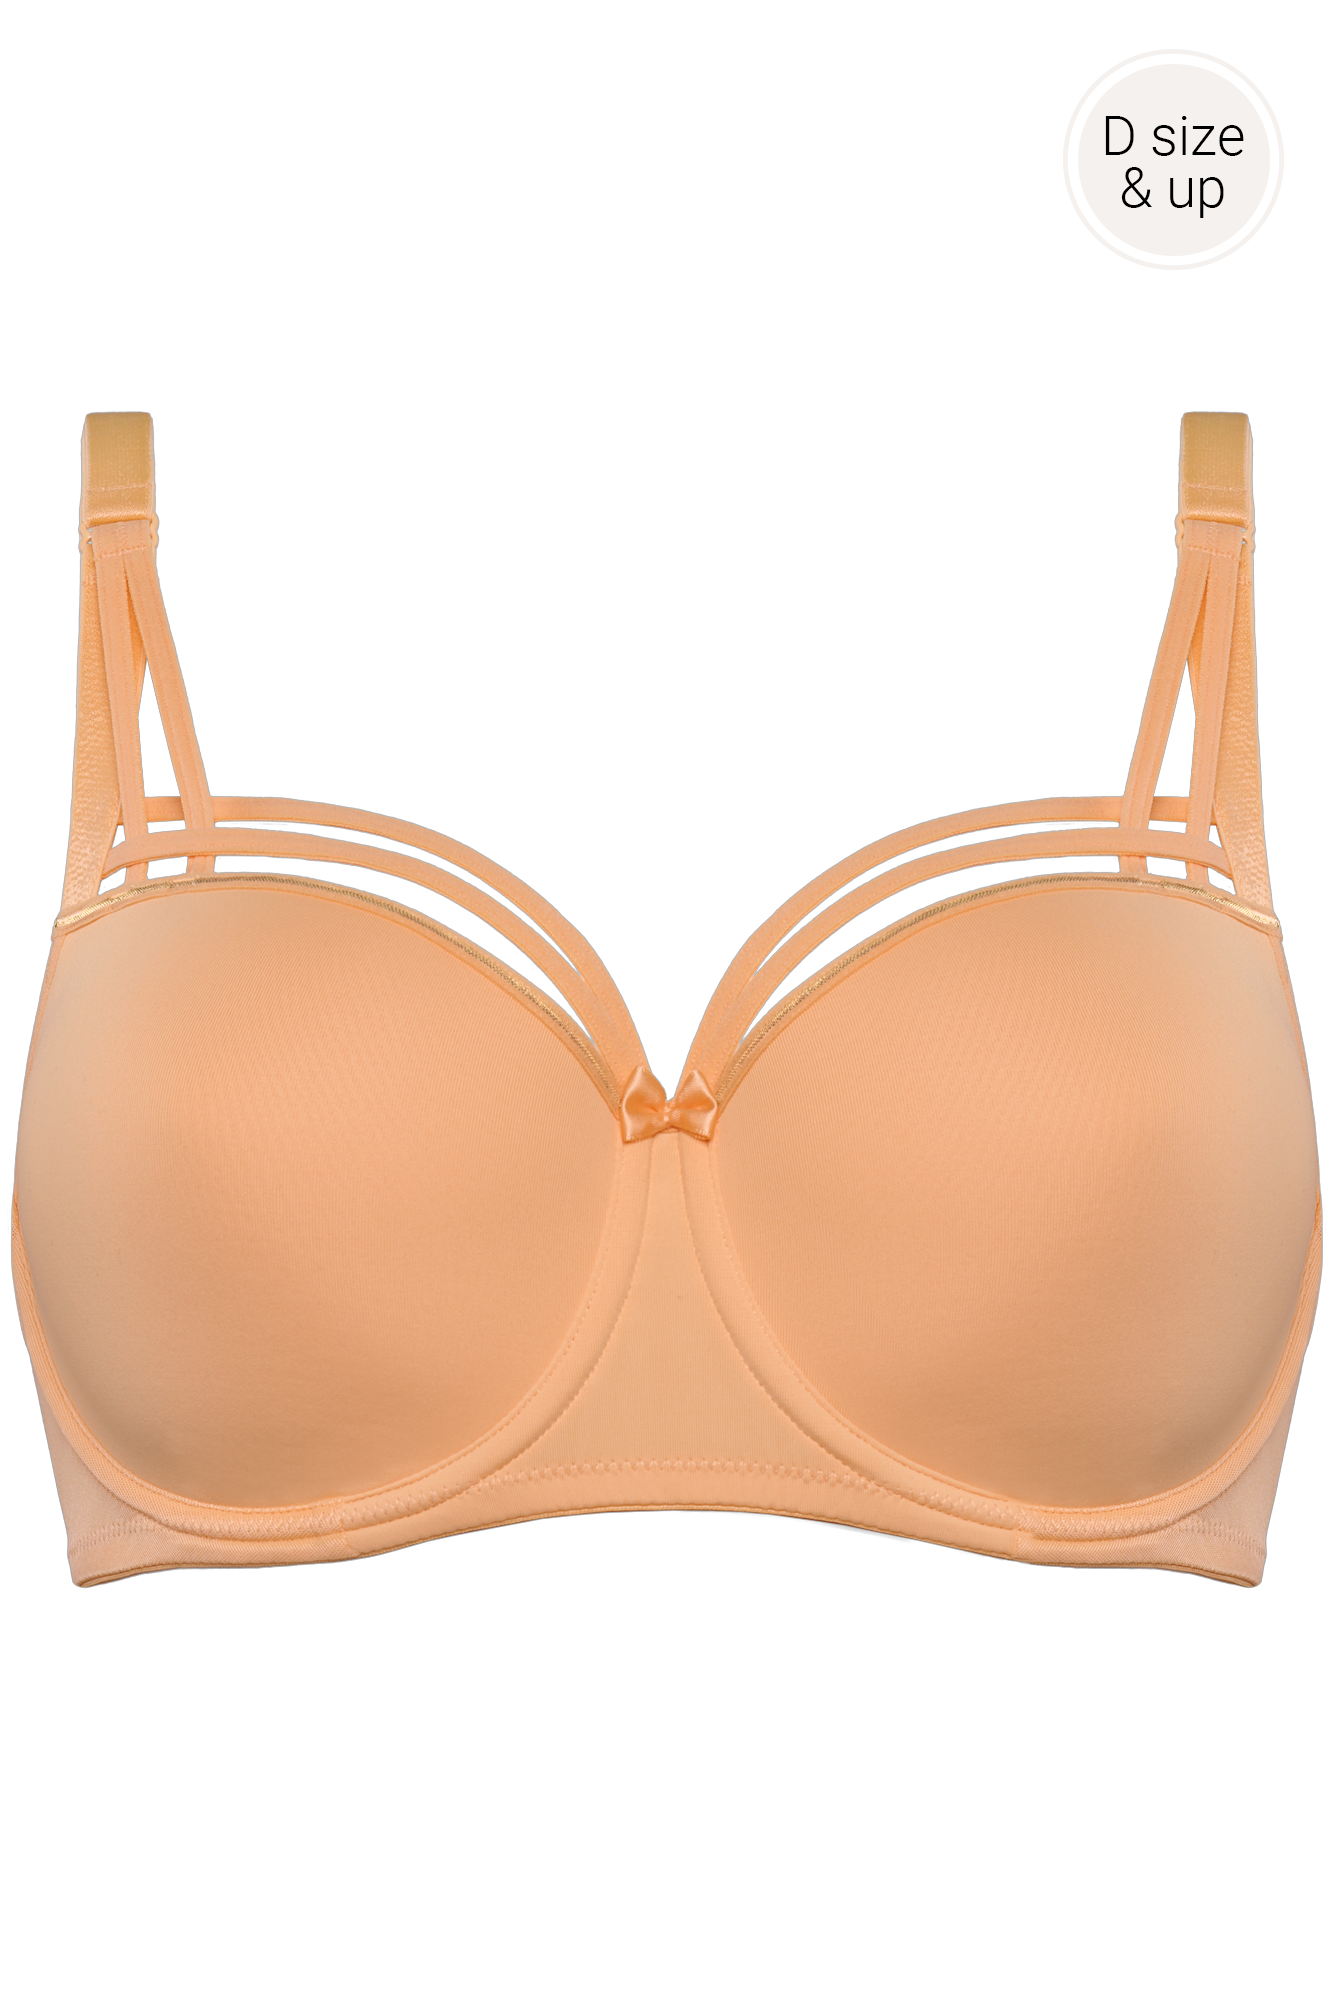 Marlies Dekkers dame de paris balconette bh wired padded apricot and gold